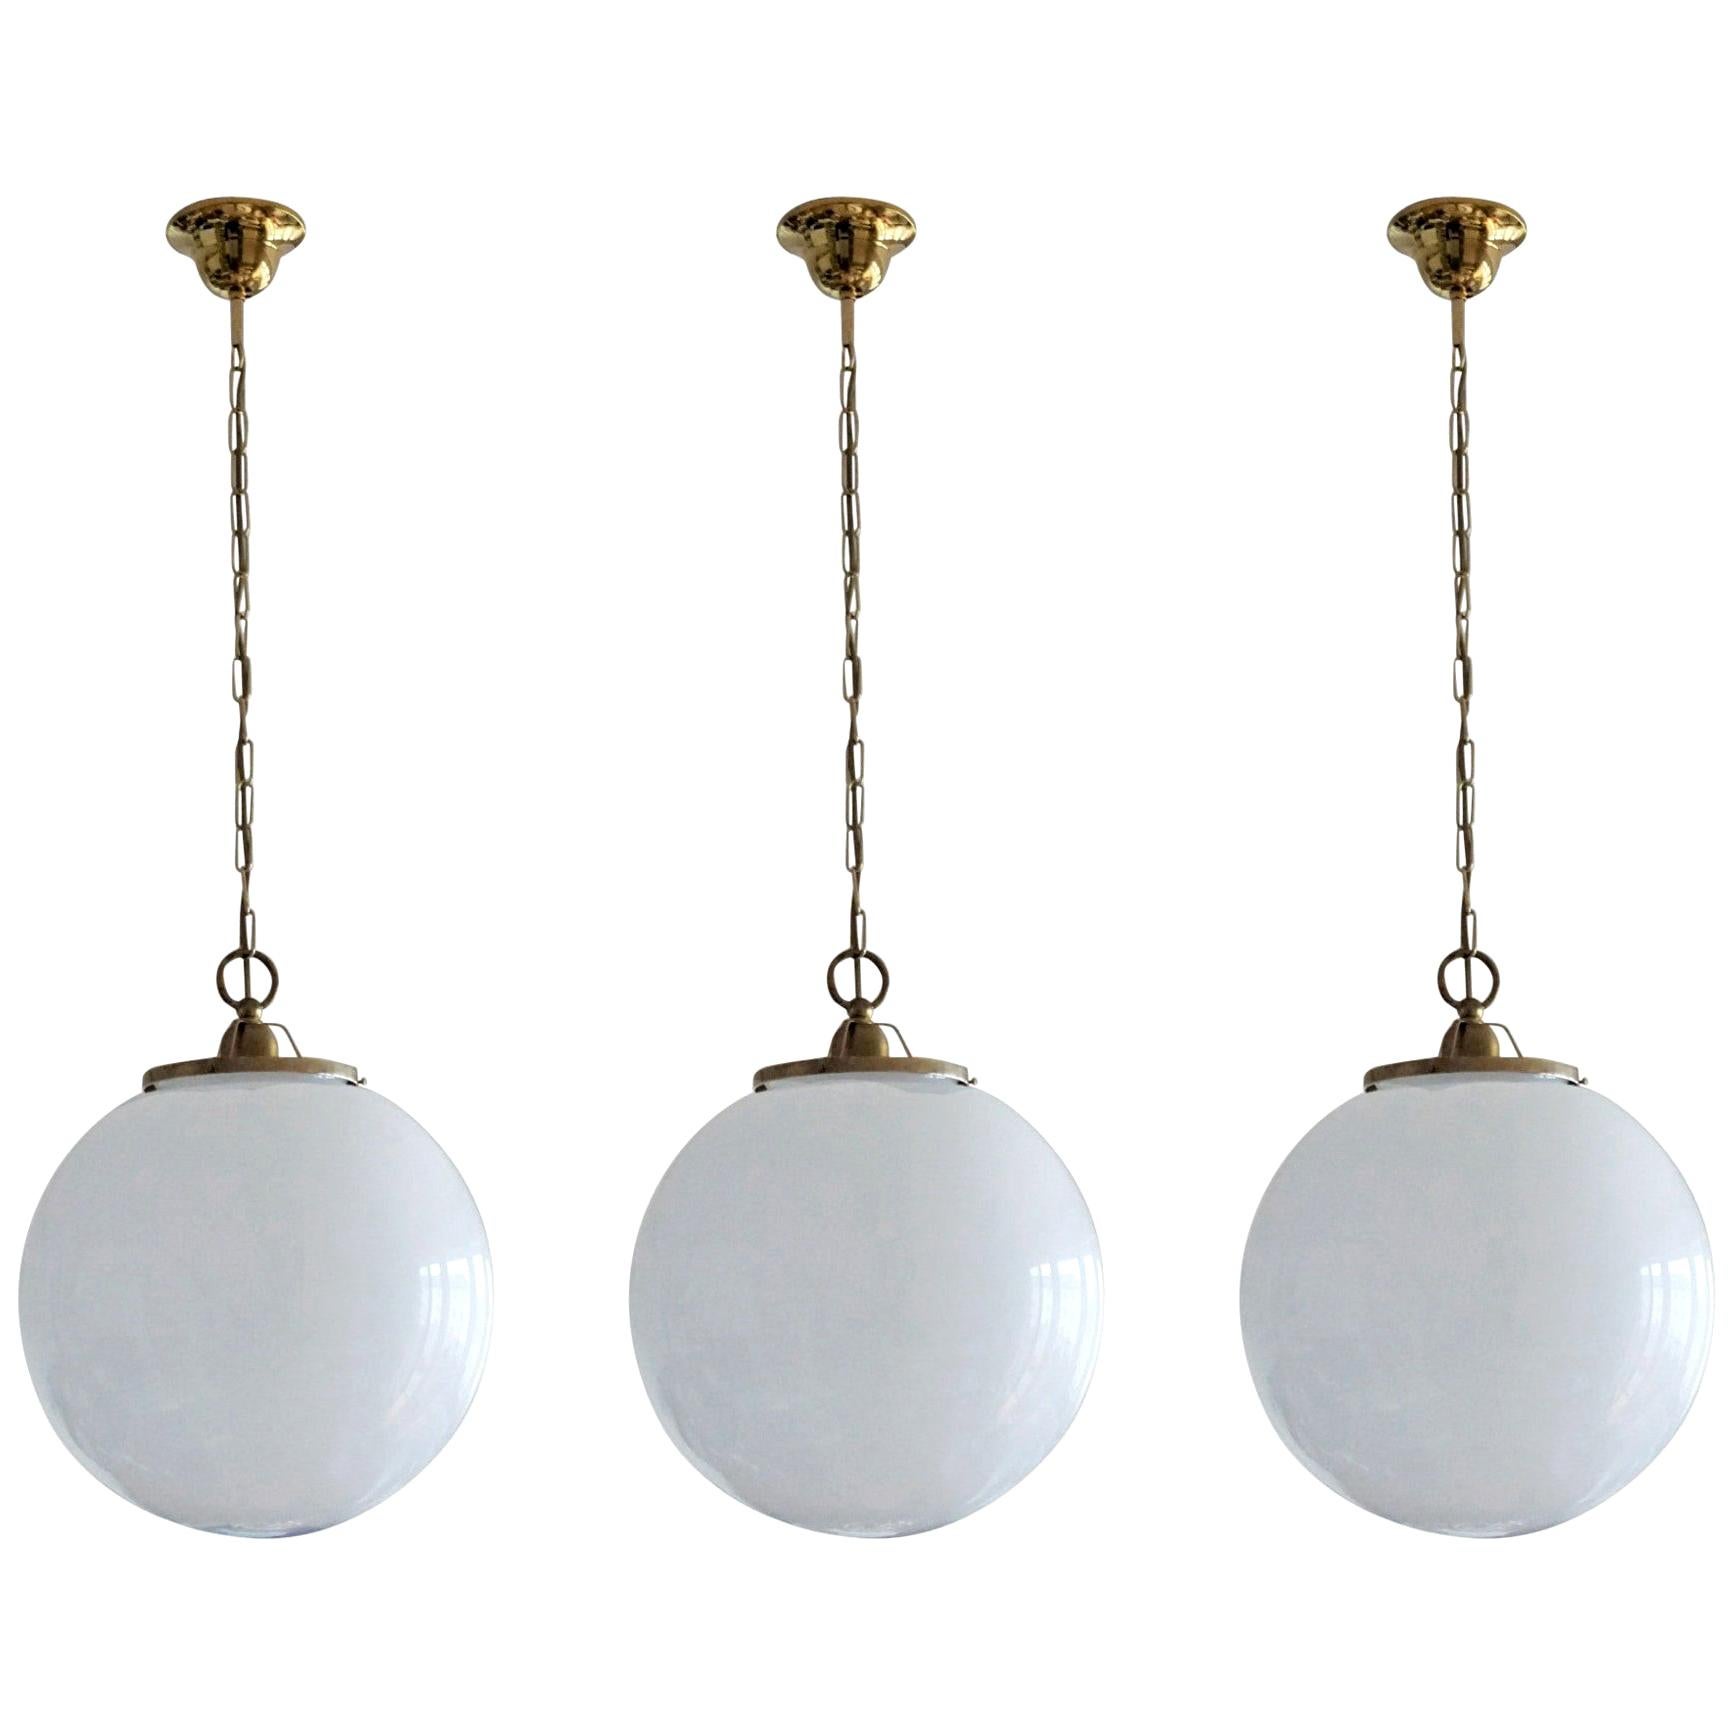 Set of thee large Italian ball hand blown opaline glass sphere pendants brass-mounted, with a single E-27 light socket for a large sized bulb, 1950s
Measures: Diameter 14